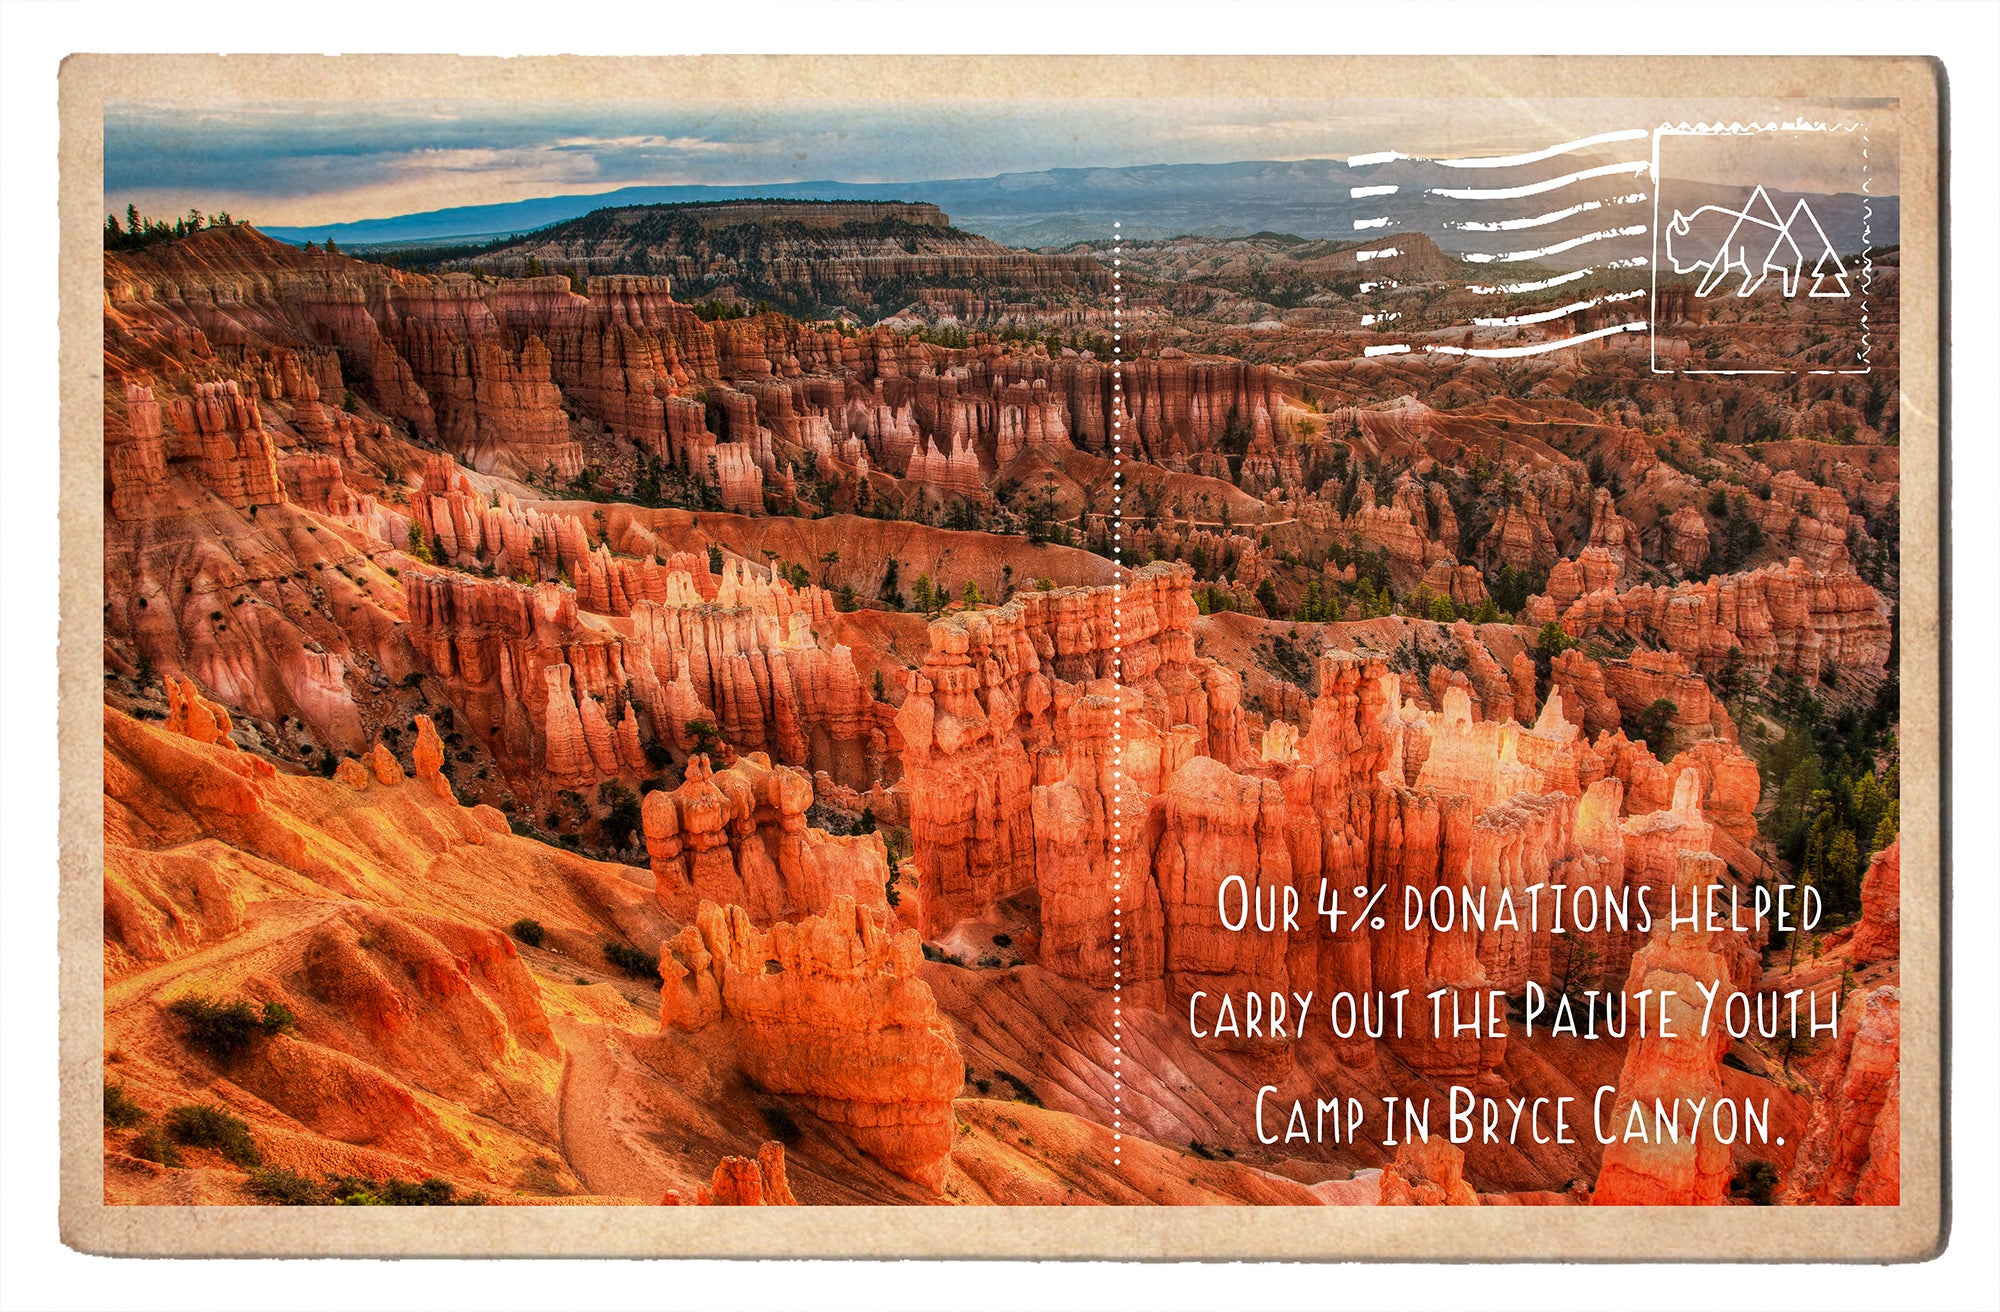 The Paiute Youth Camp in Bryce Canyon